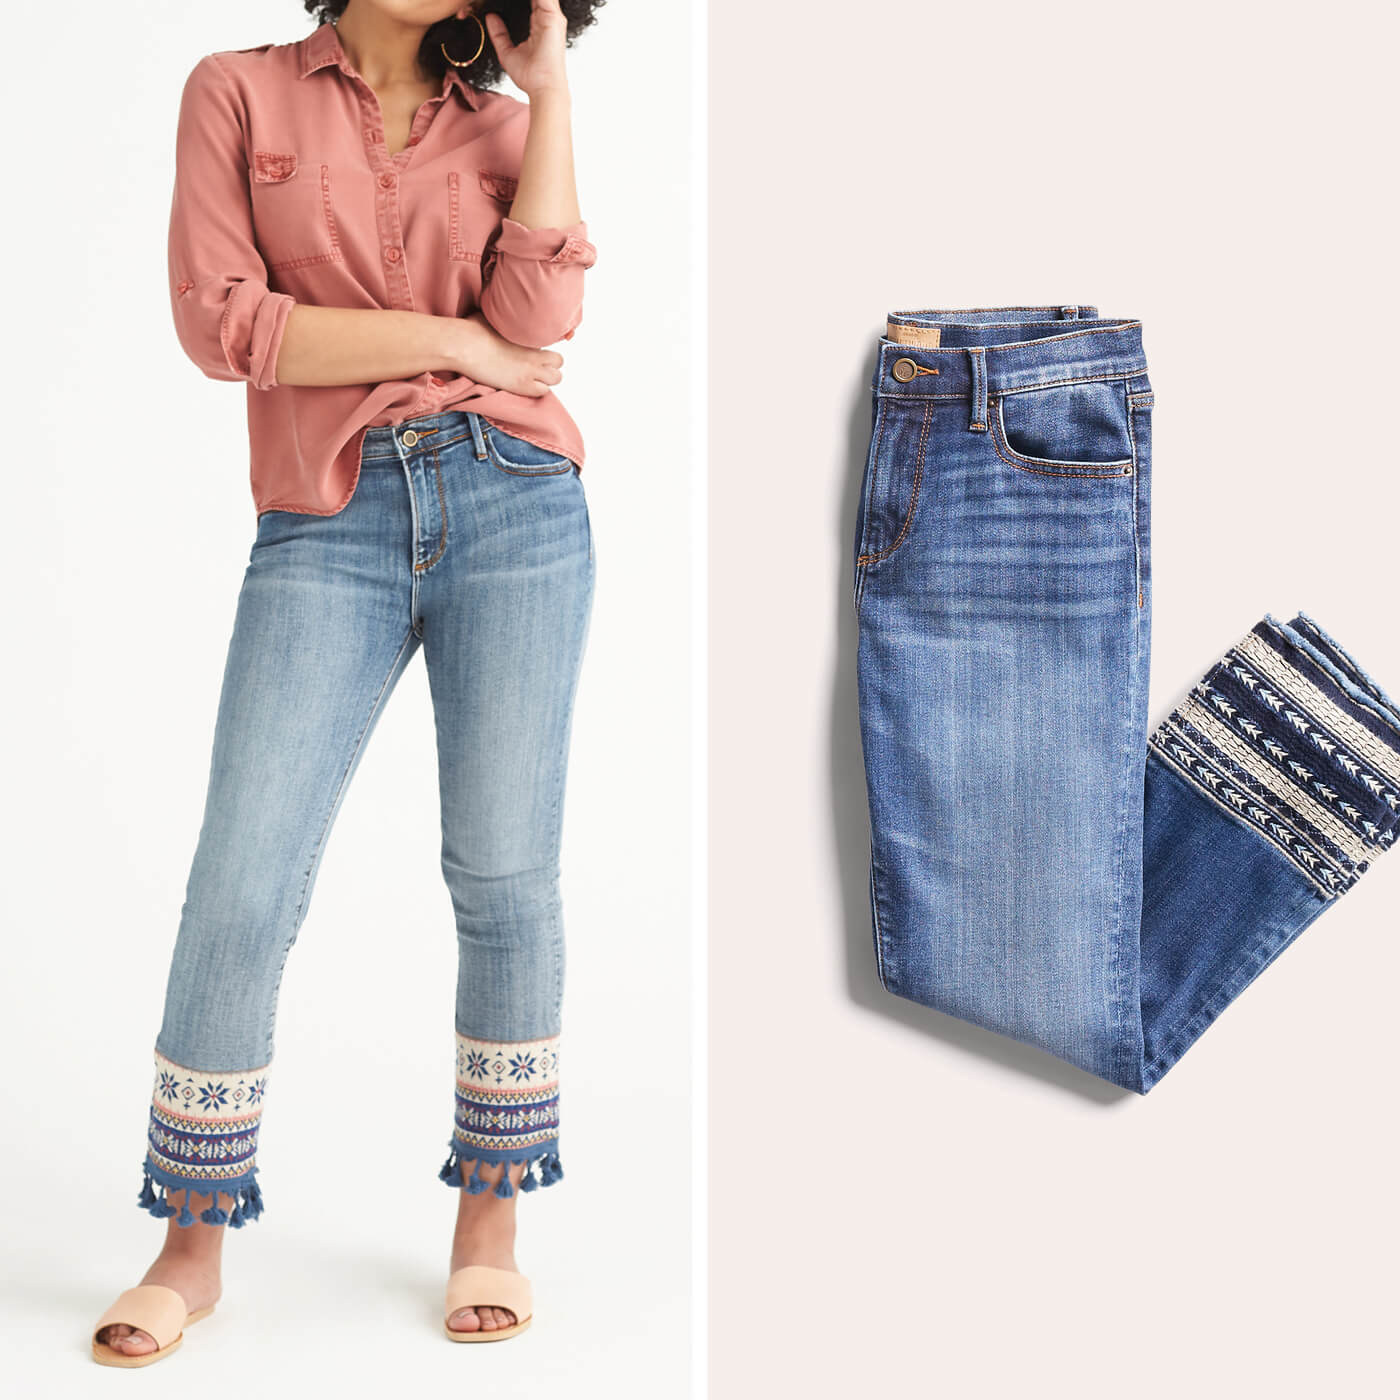 Do Flare Jeans Suit Short Legs? Styling Tips for Petite Women!